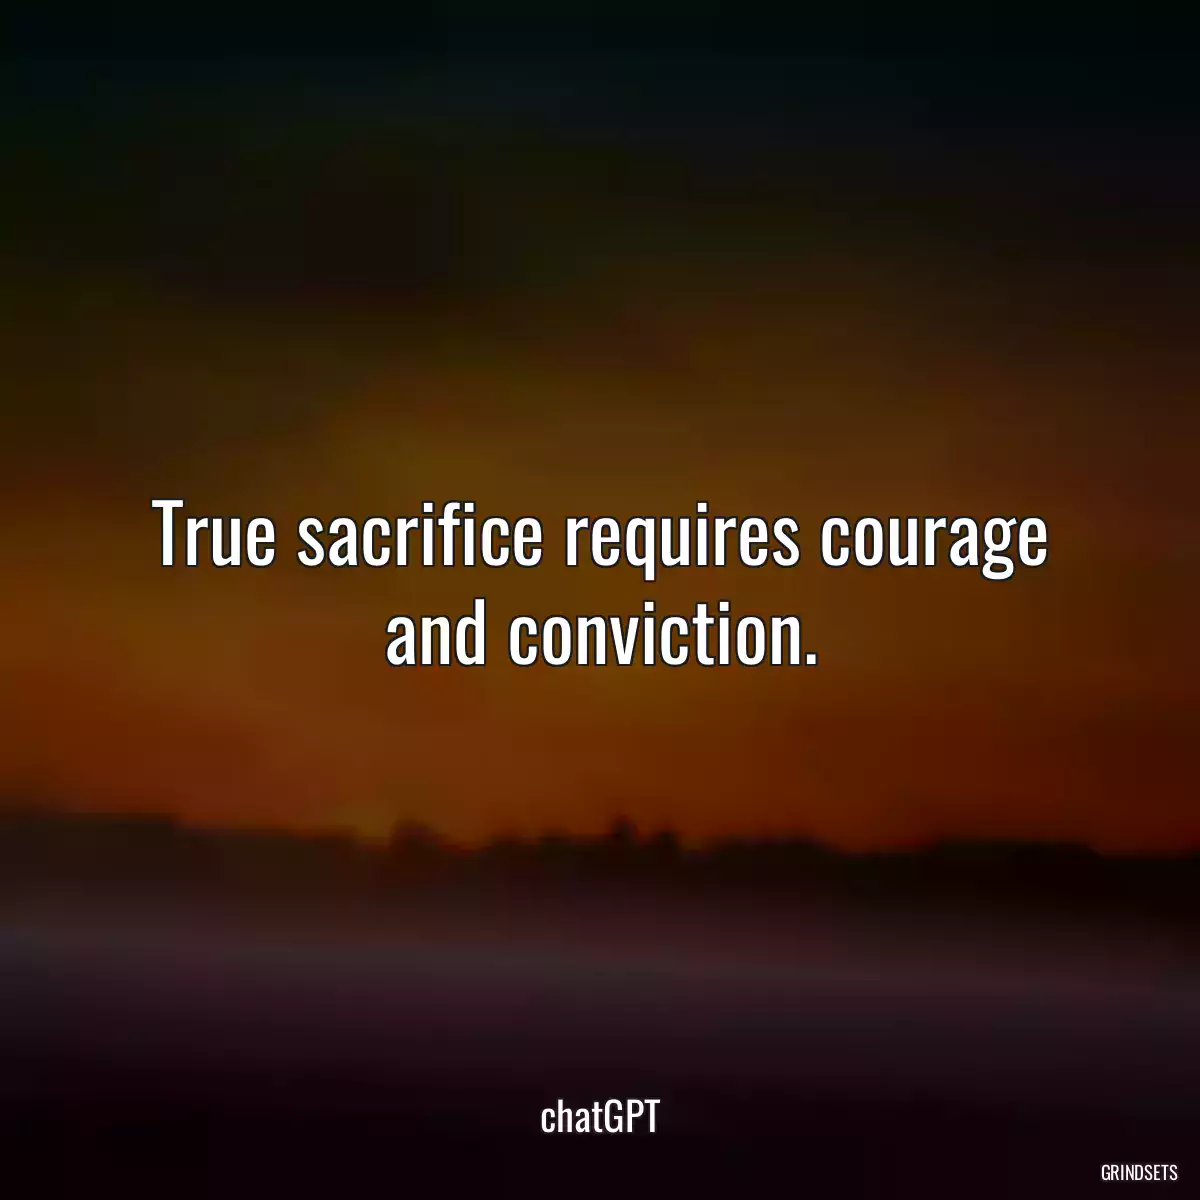 True sacrifice requires courage and conviction.